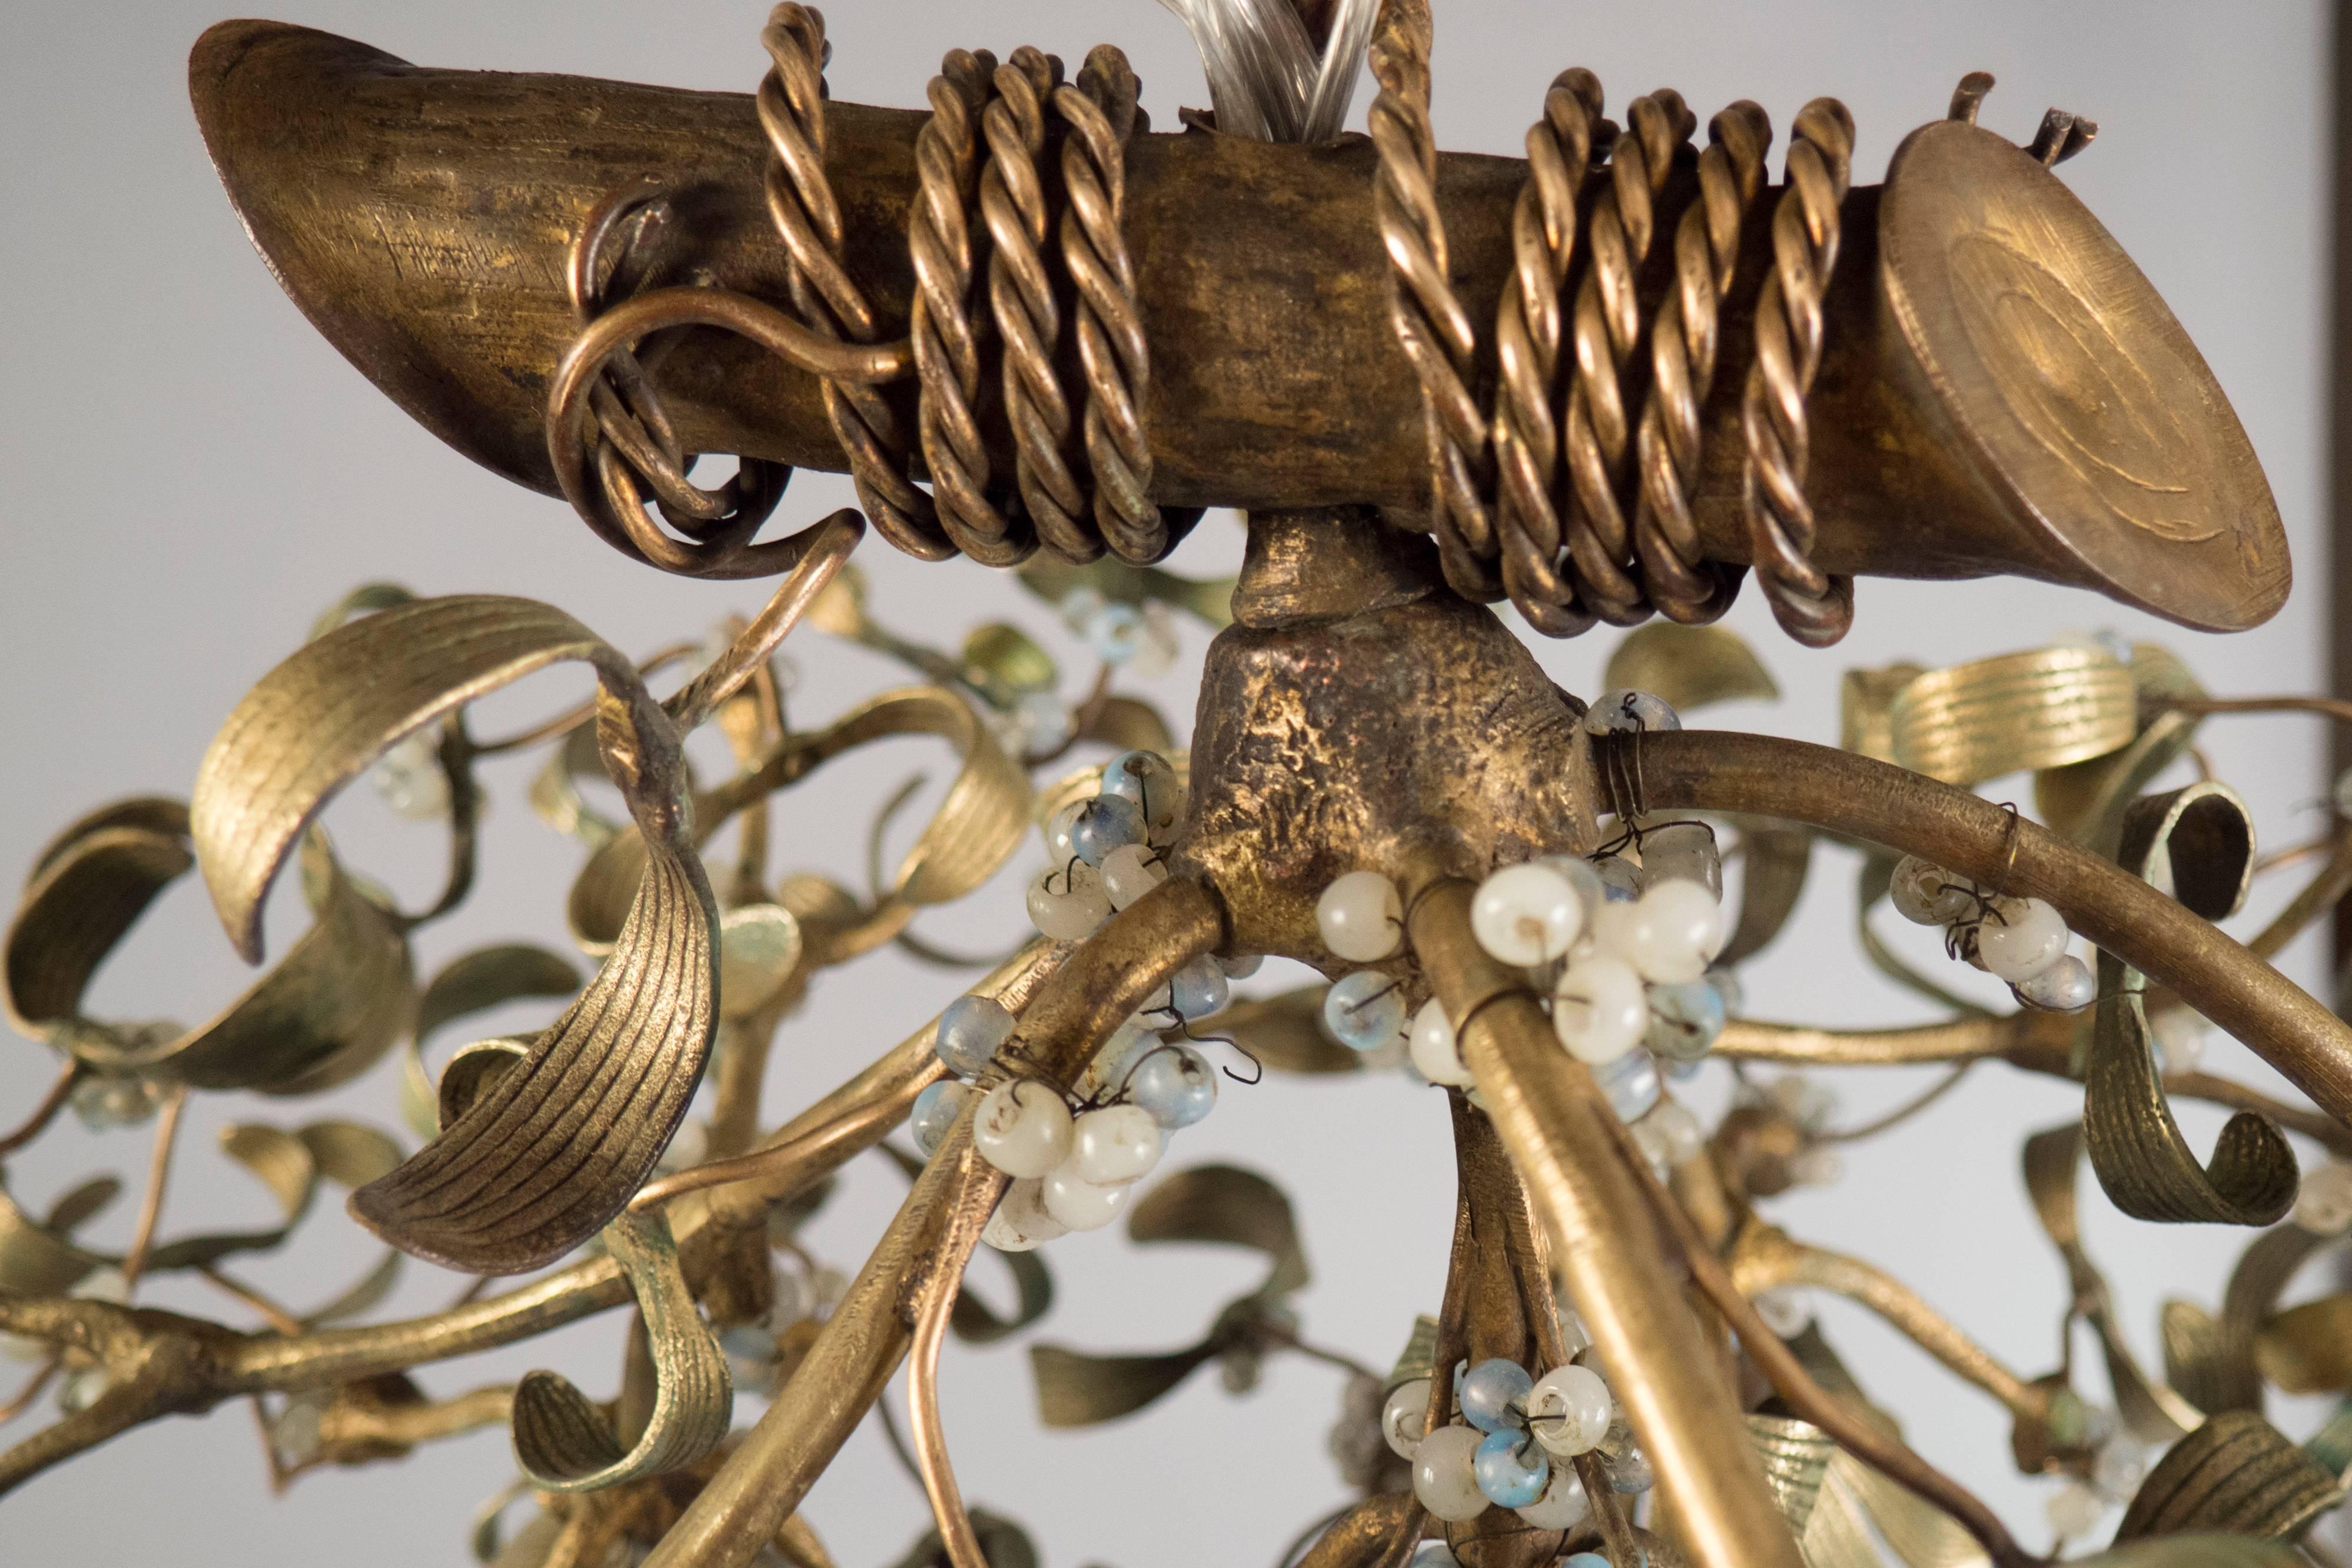 Green-brown patinated bronze chandelier in the shape of a mistletoe, featuring a roped off branch and numerous opaline glass pearls throughout.